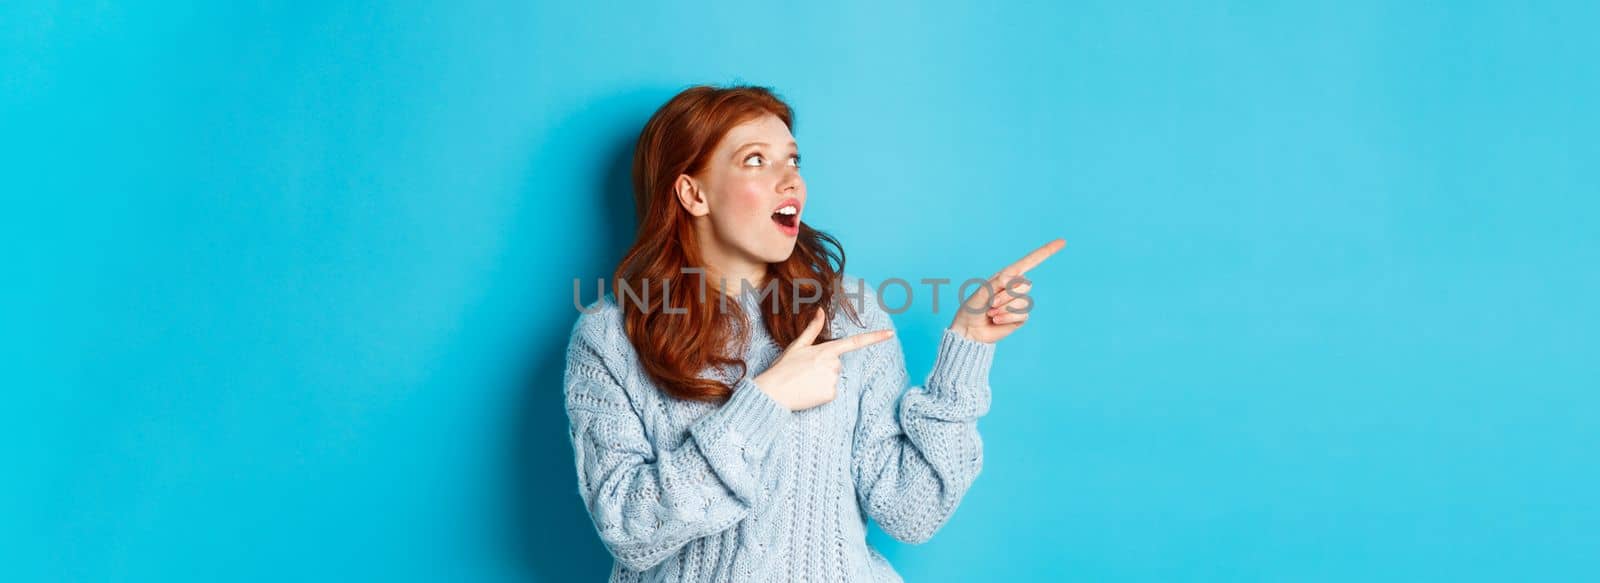 Winter holidays and people concept. Amazed redhead girl checking out promo offer, pointing and looking left at copy space, standing against blue background.